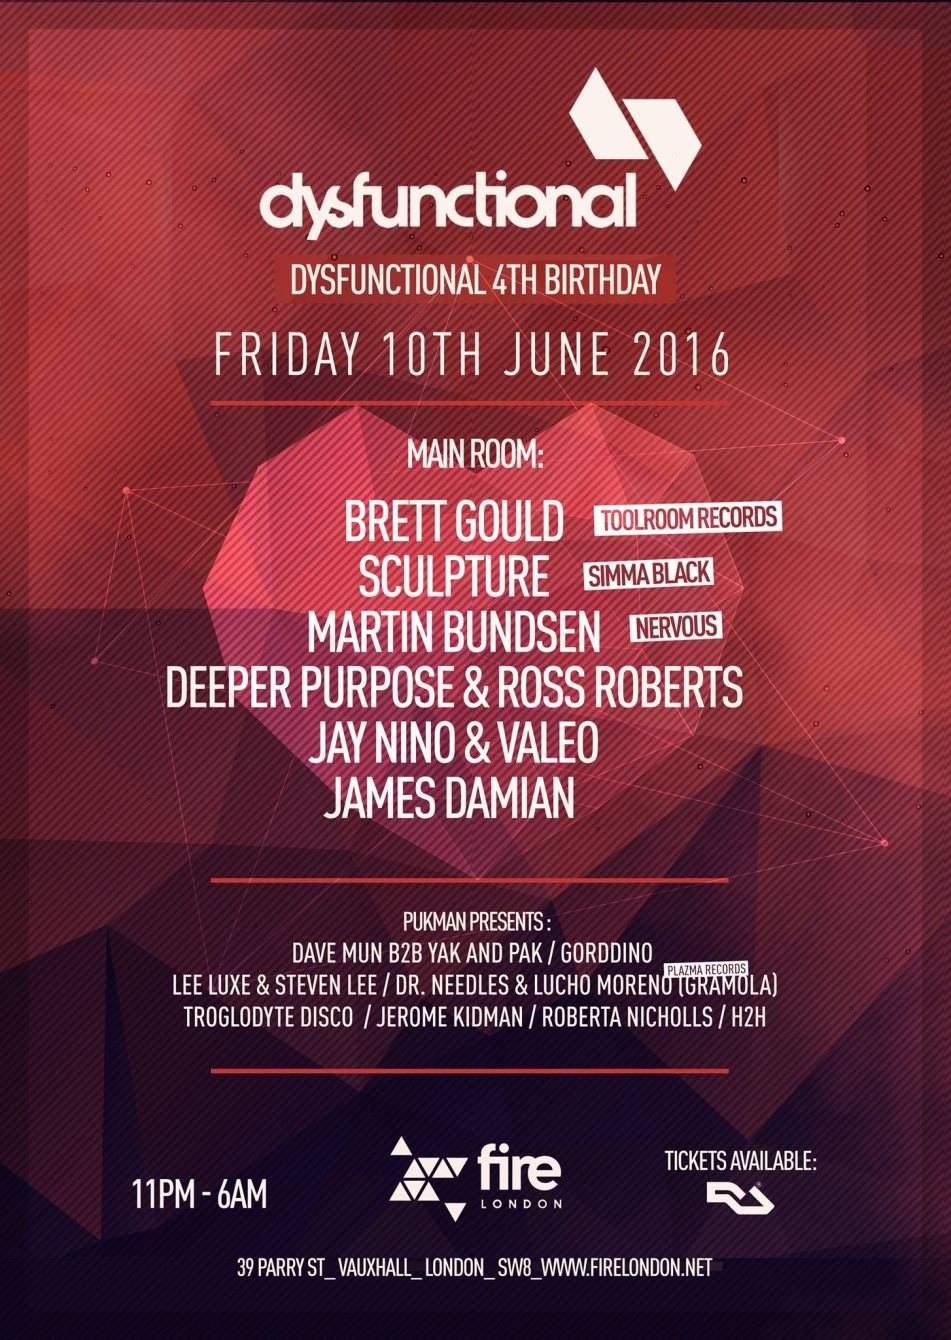 Boat Party Friday Sessions Followed by Dysfunctional 4th Birthday - Página frontal